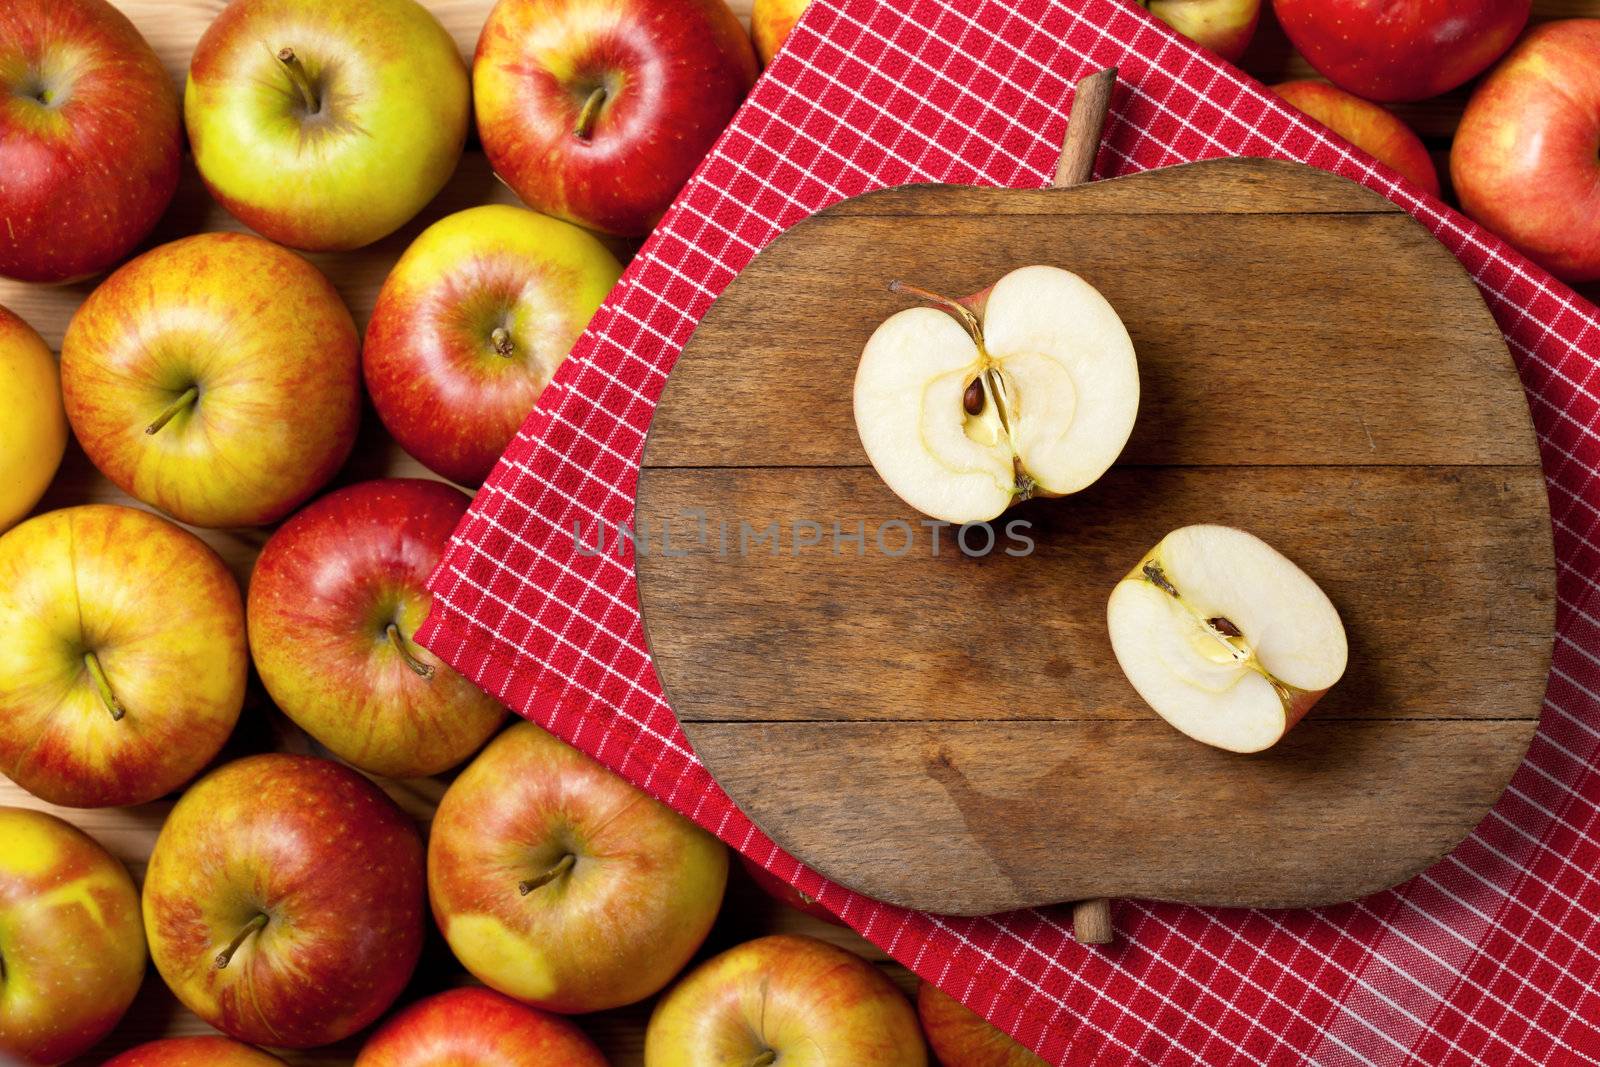 Apples composition with fruits and cutting board with apple shape. Top view